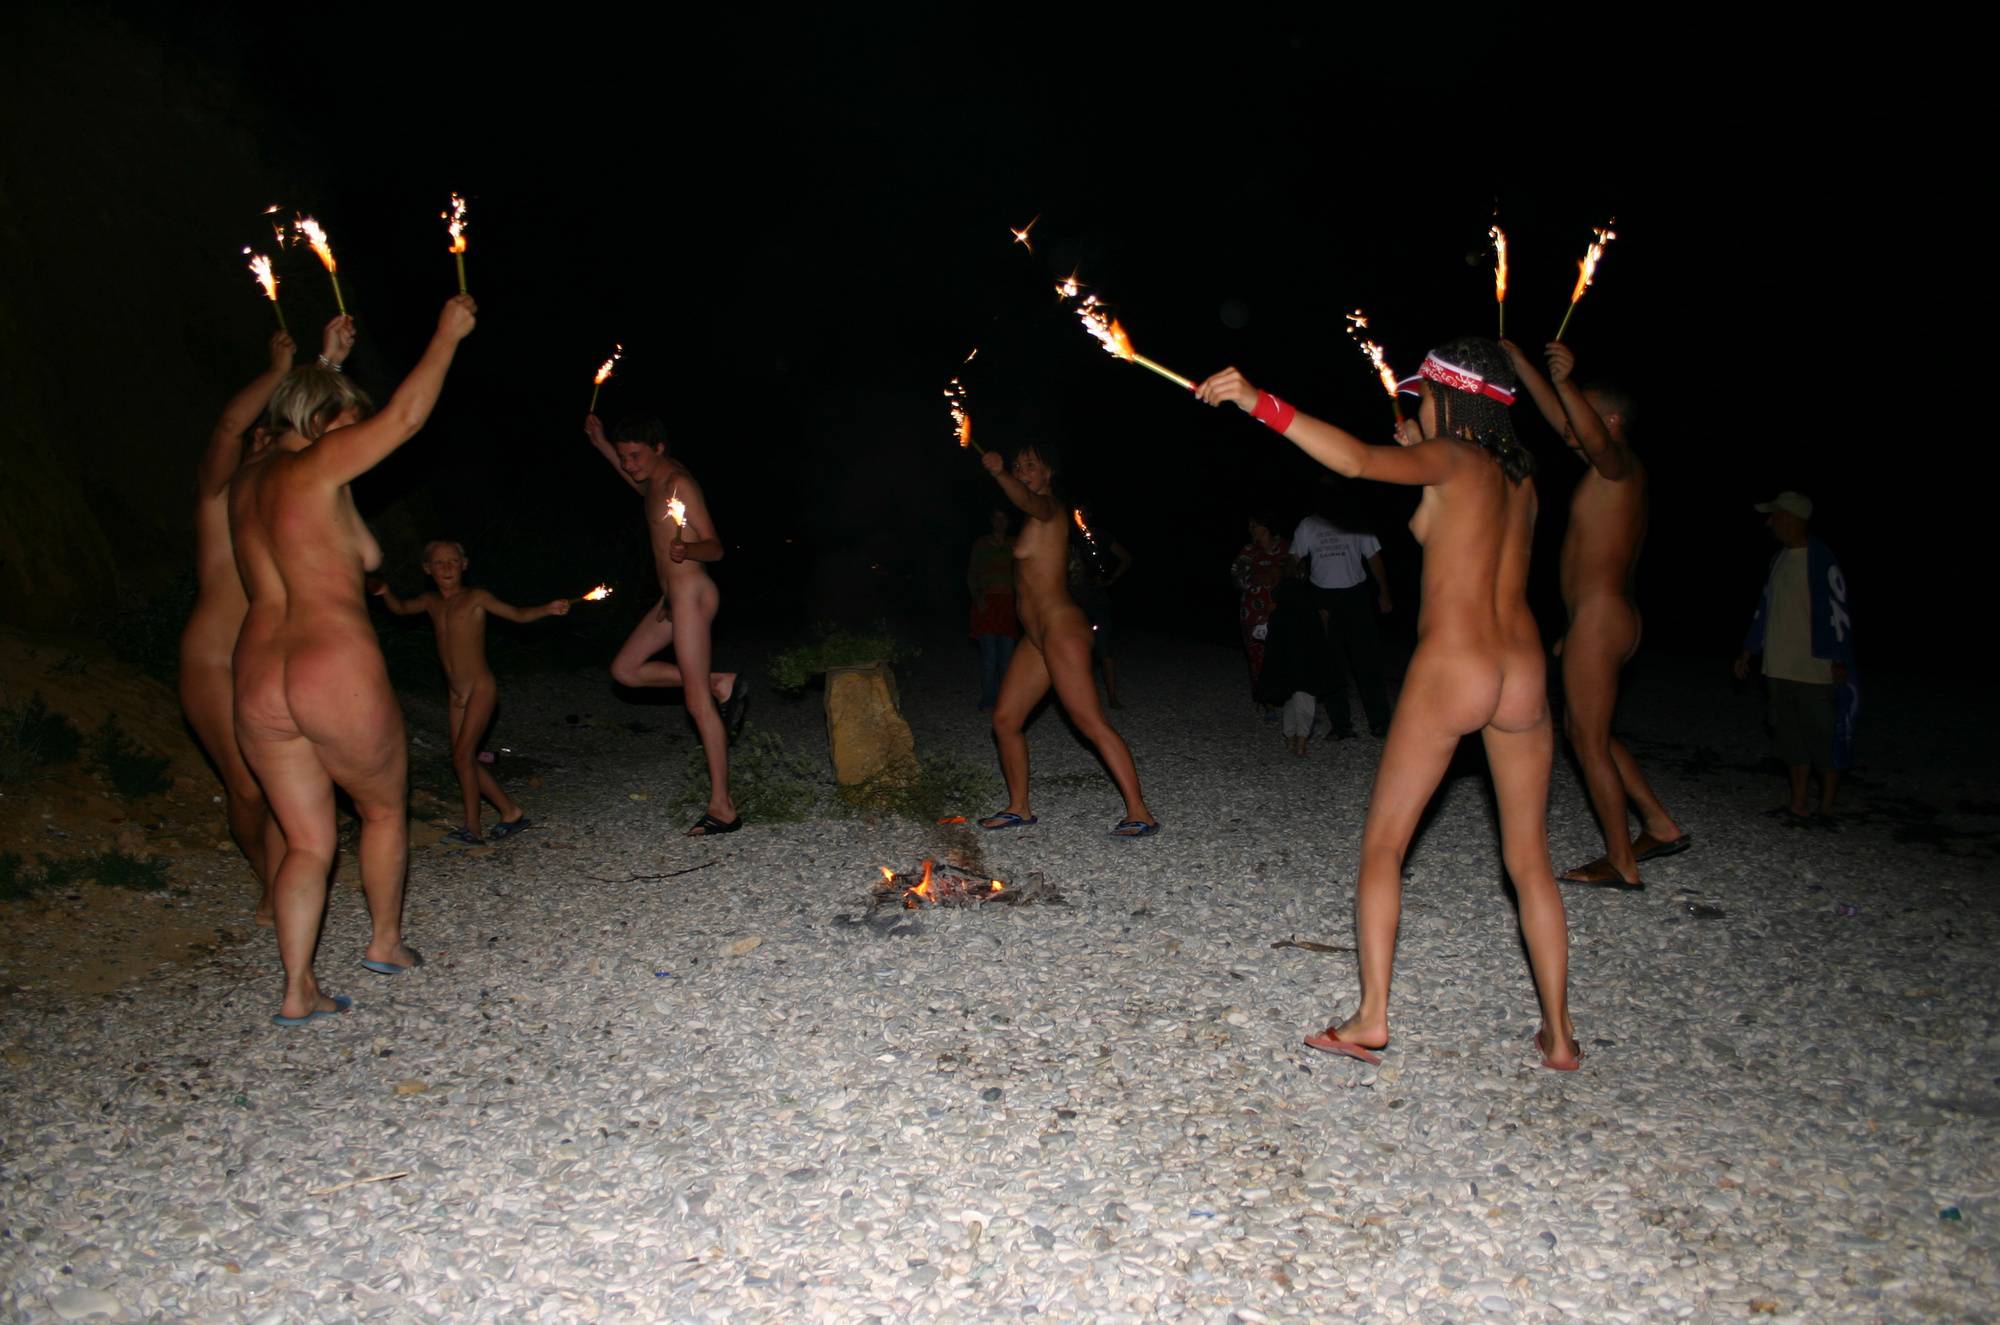 Family Nudism Pics - Fire and Bow Night Dancing - 1